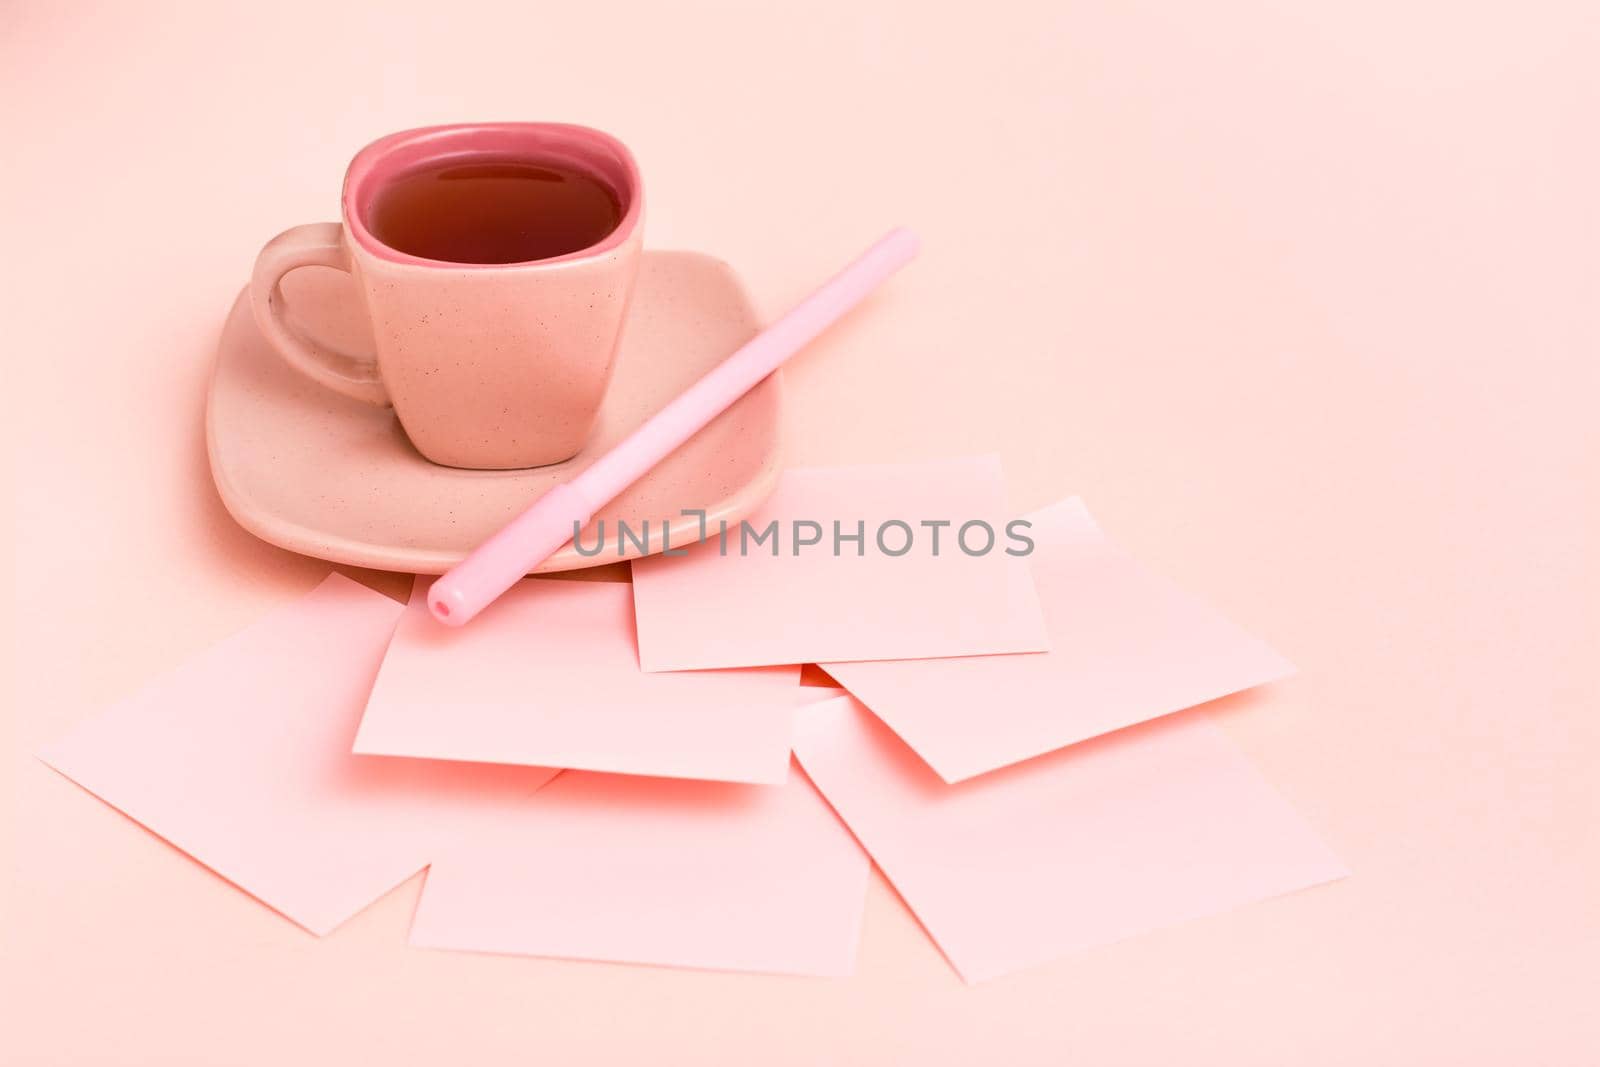 The concept is pink. Pink drink in a coffee cup, writing sheets and pen on a pink background